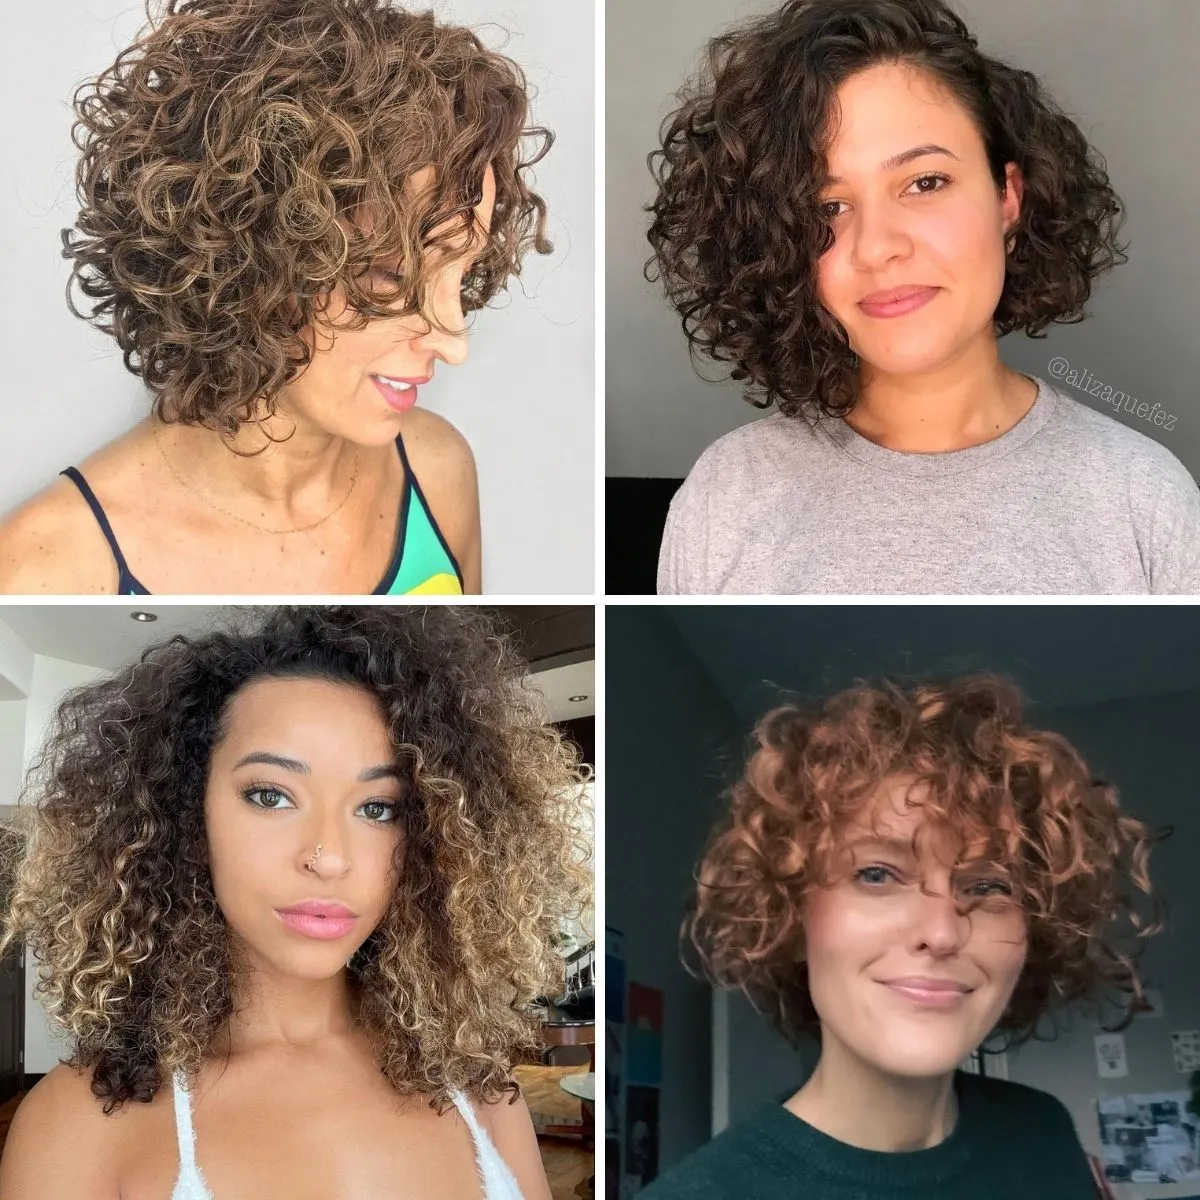 15 Best Short Curly Hairstyles - Haircuts for Short Curly Hair